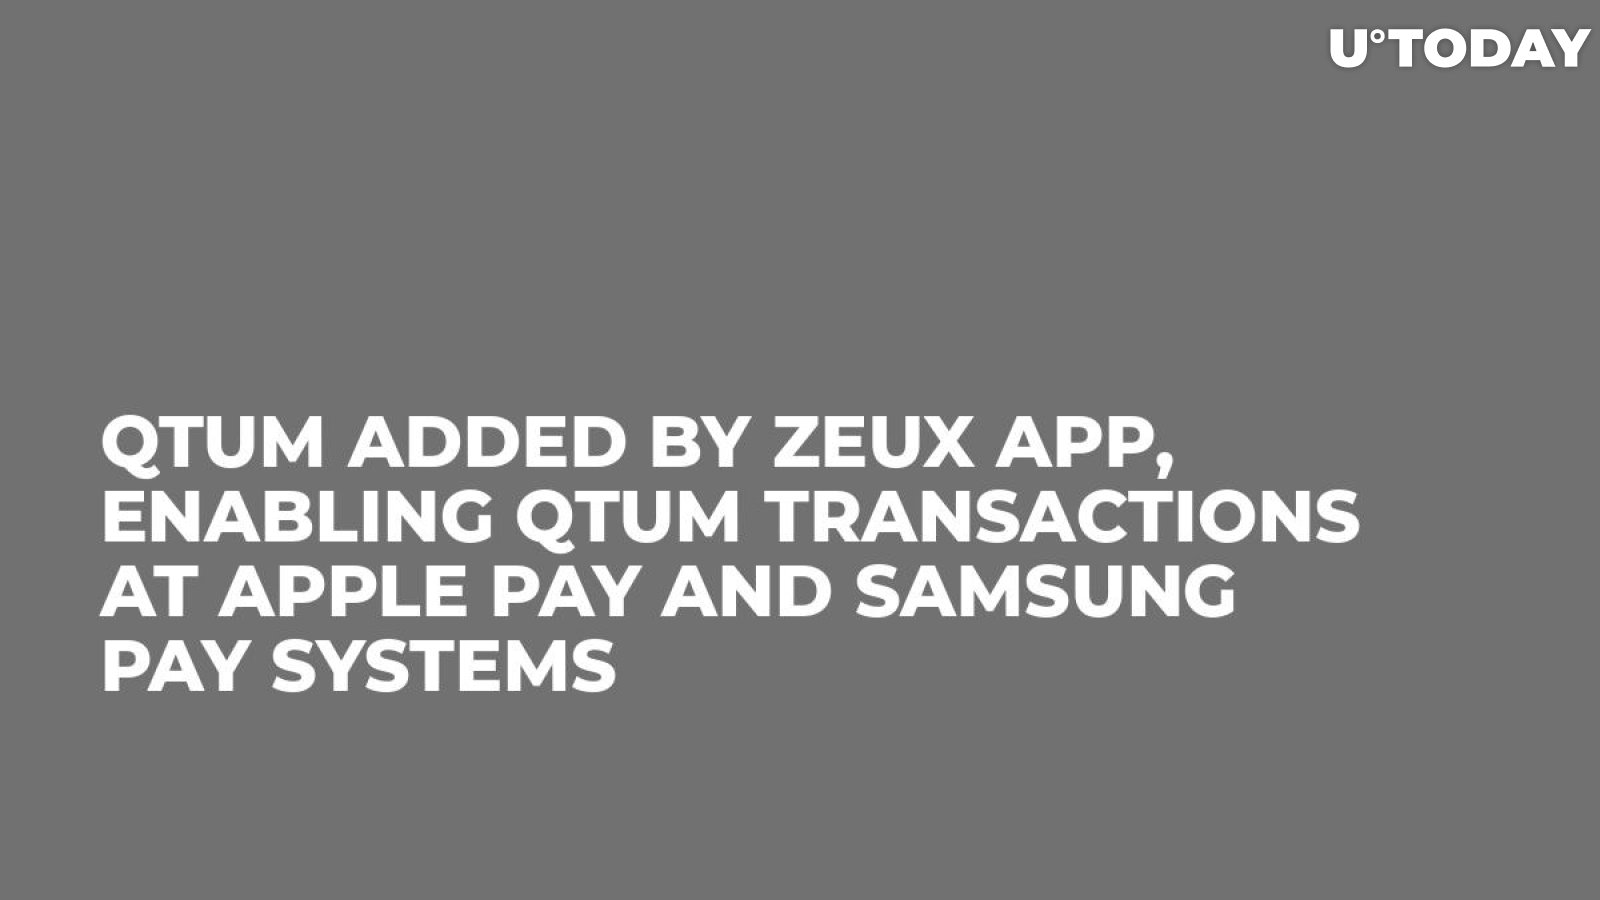 QTUM Added by Zeux App, Enabling QTUM Transactions at Apple Pay and Samsung Pay Systems